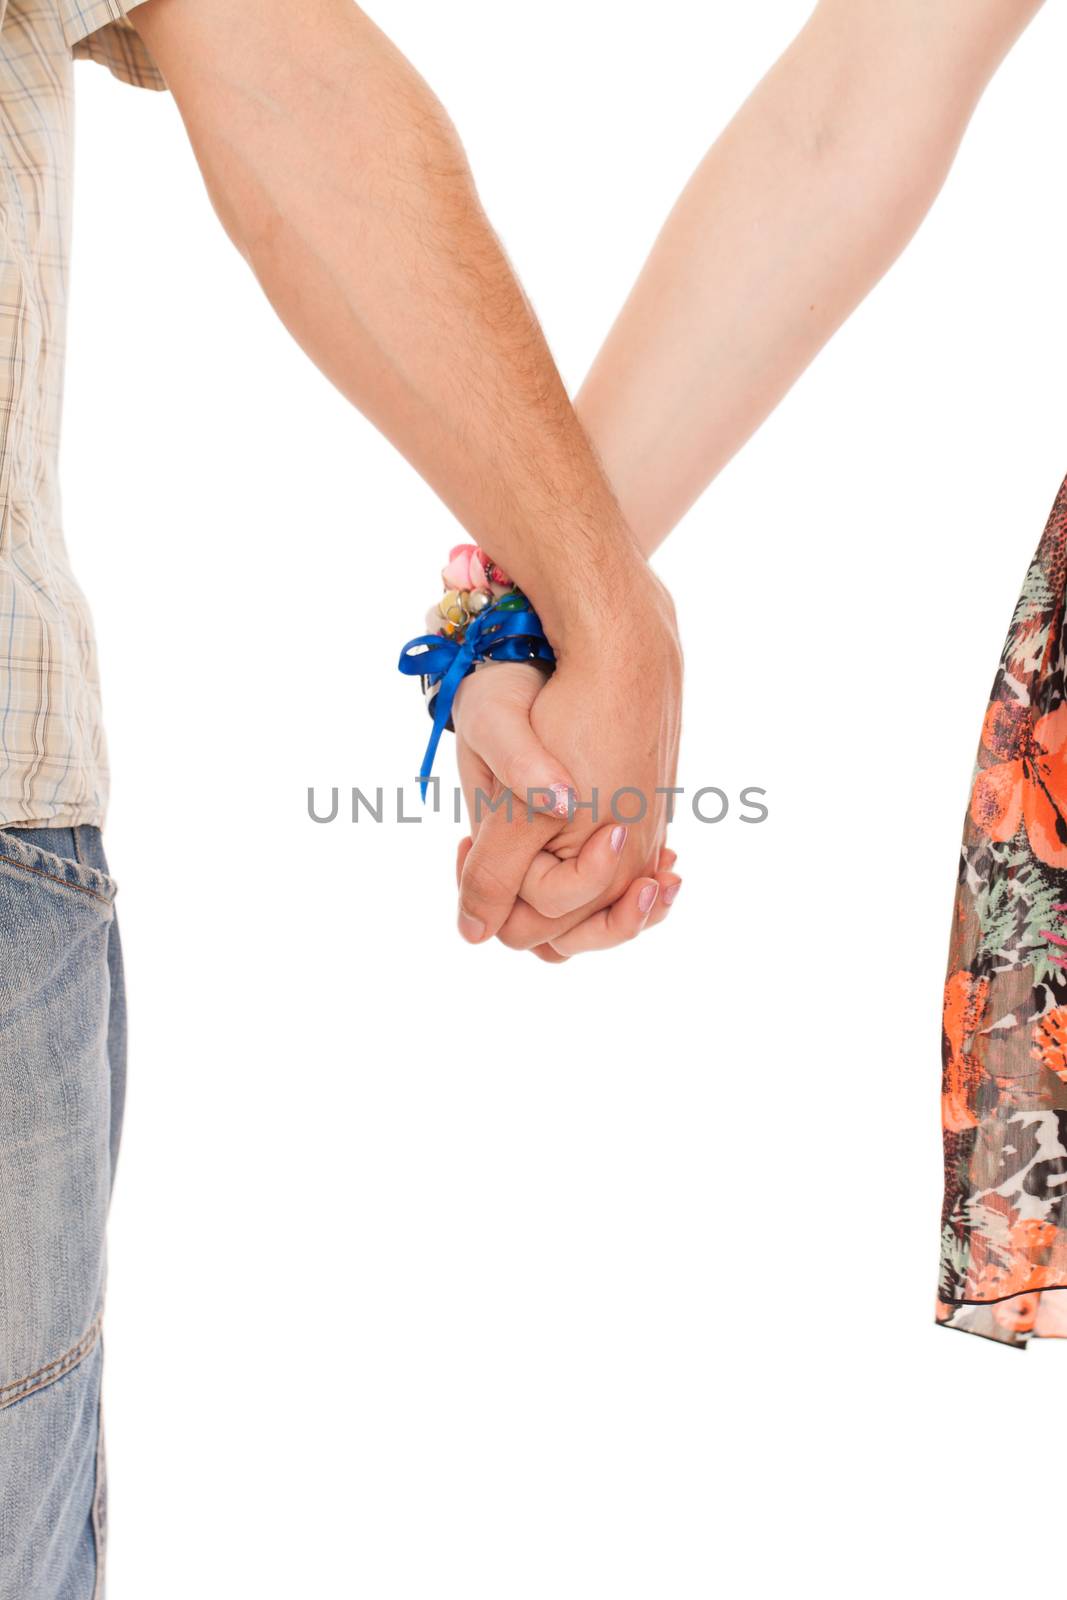 Hands together of romantic caucasian couple over white background